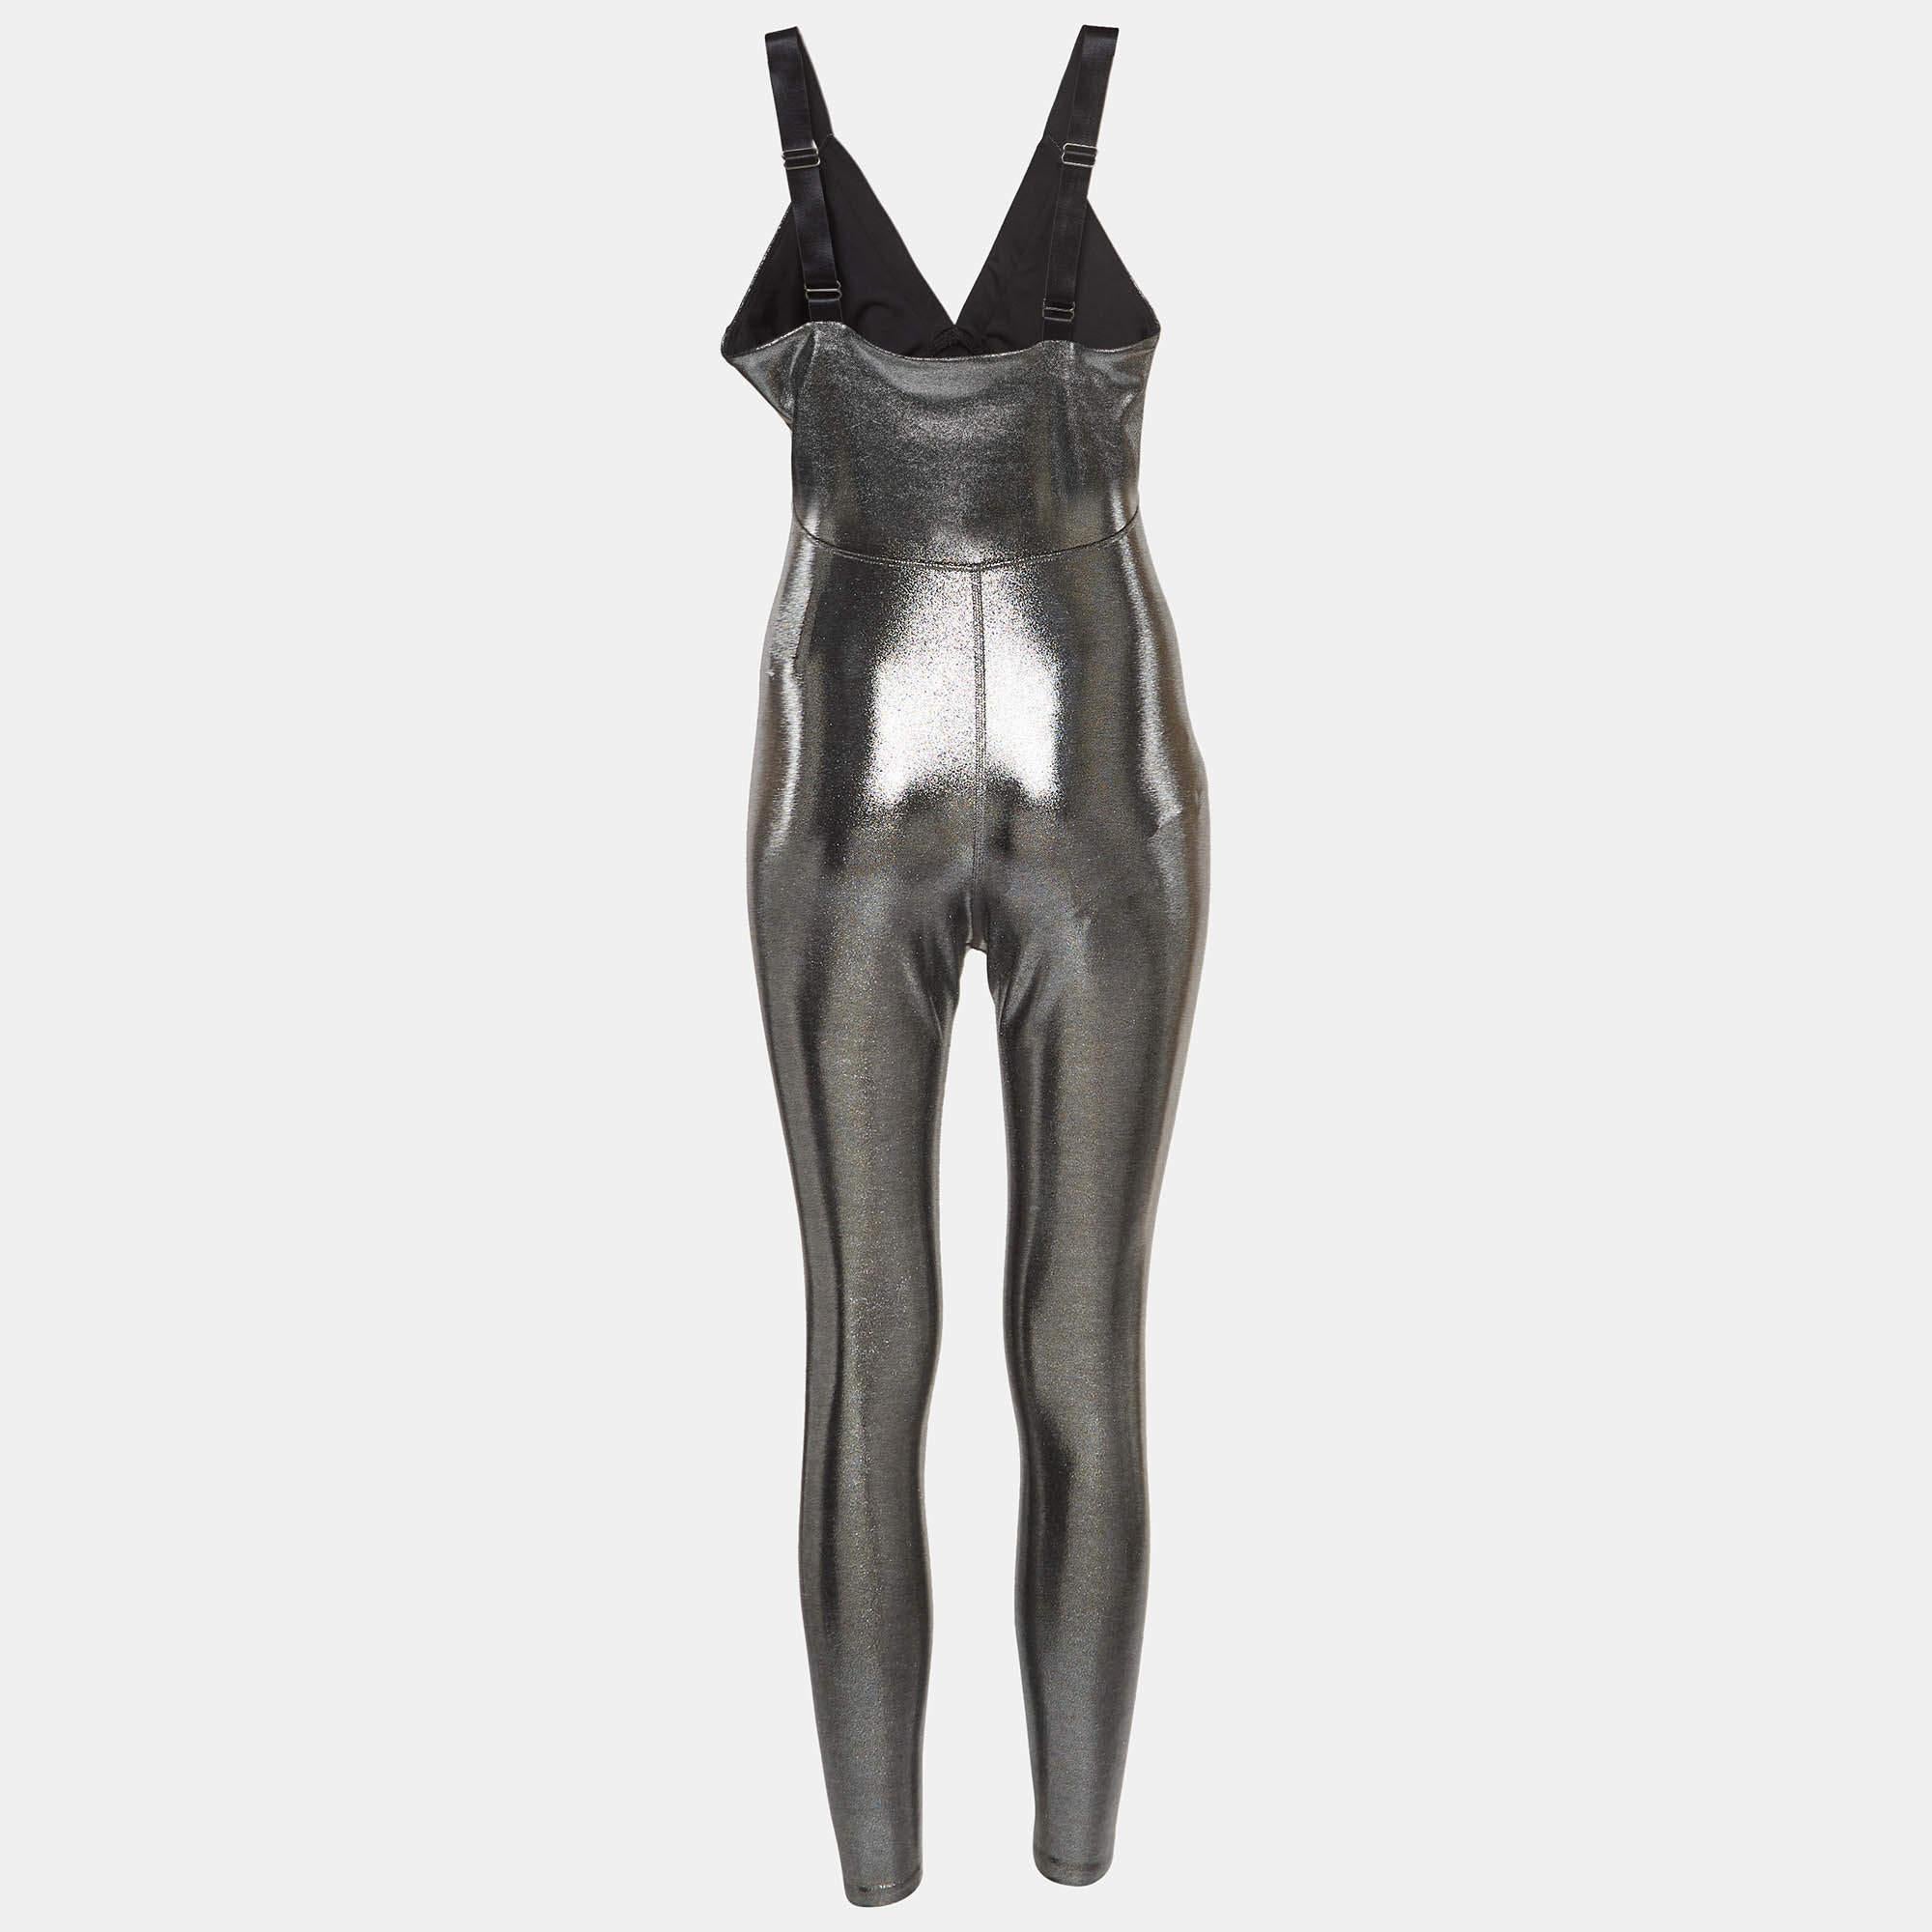 The Heroine jumpsuit is a stunning one-piece statement ensemble, blending fashion and function. Crafted with eye-catching metallic silver lamé fabric, it features a sleek design, form-fitting silhouette, and flattering v-neck, making it a bold and